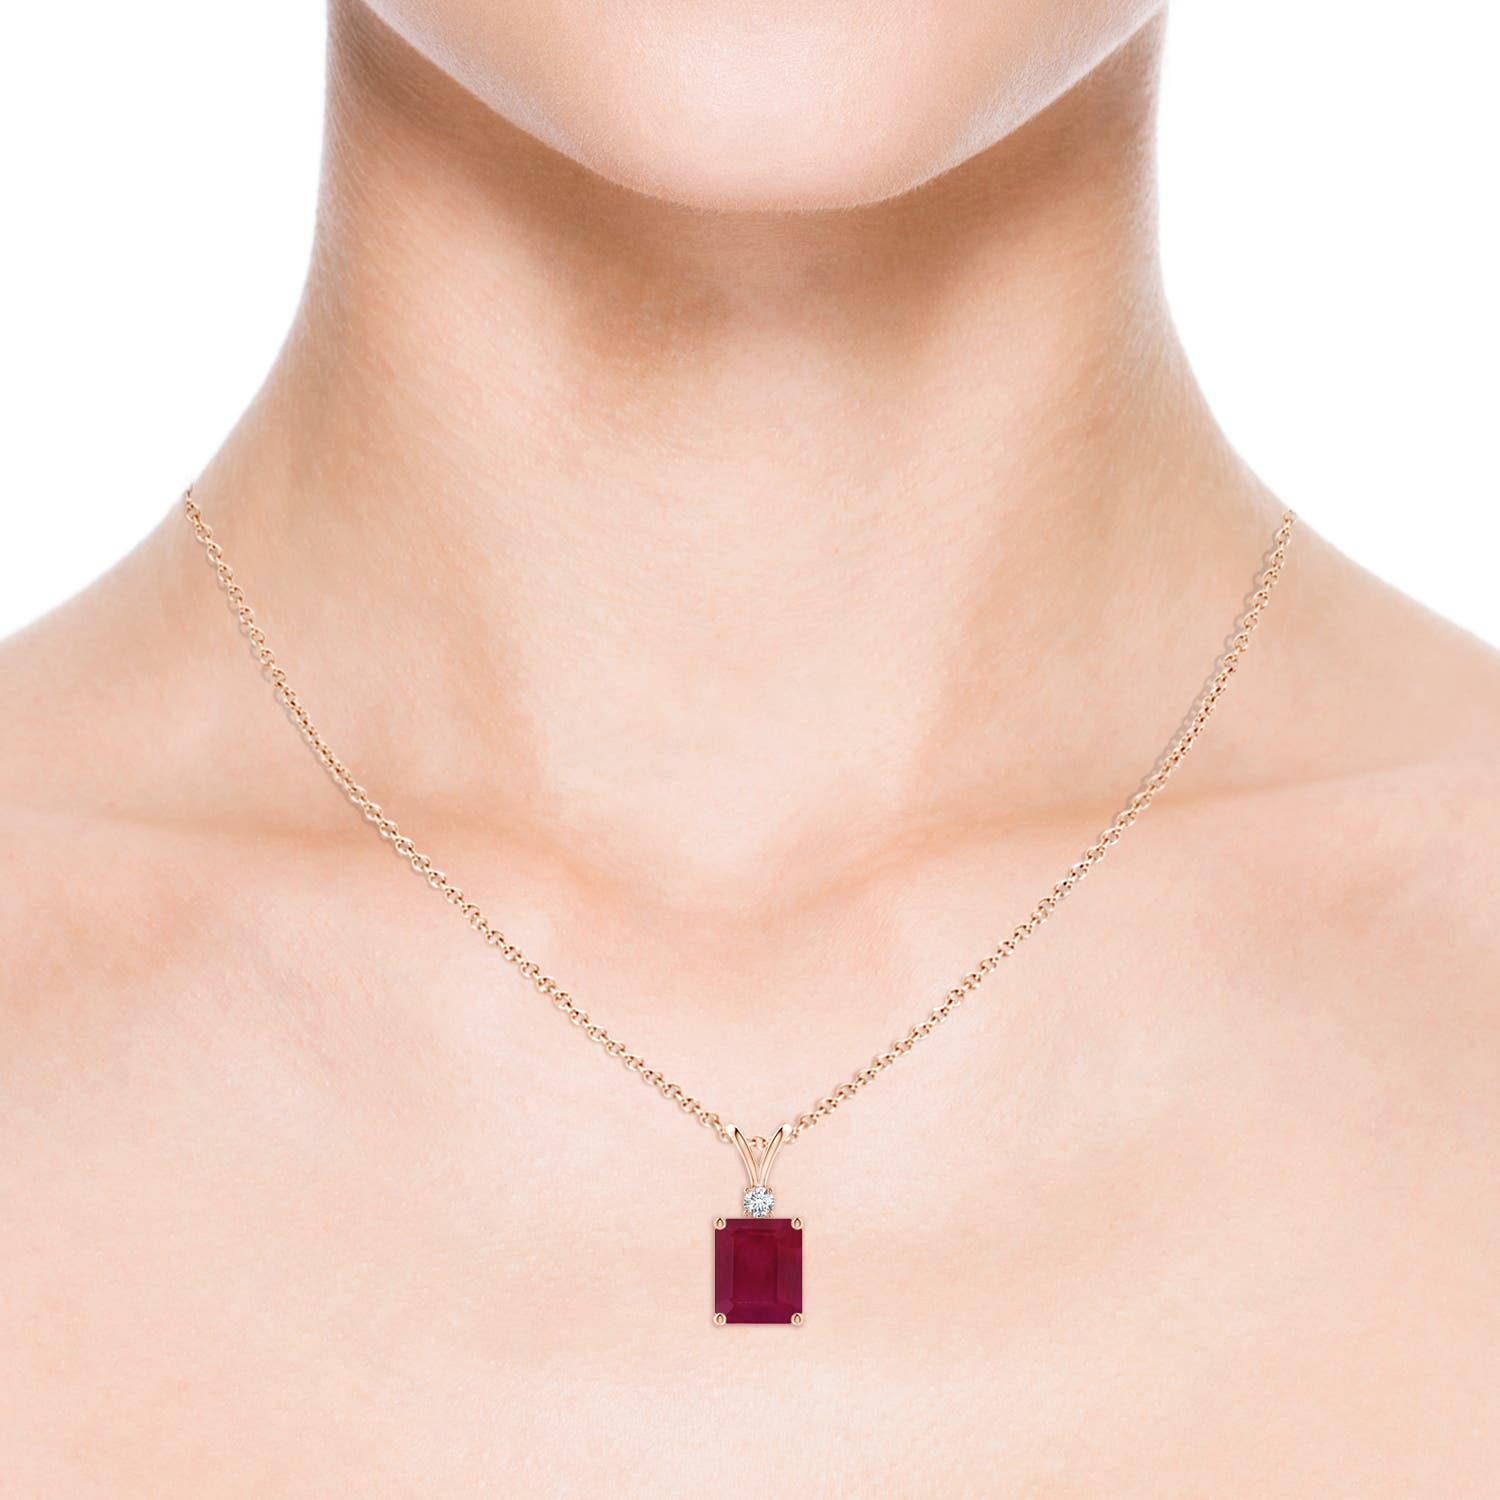 A - Ruby / 6.41 CT / 14 KT Rose Gold